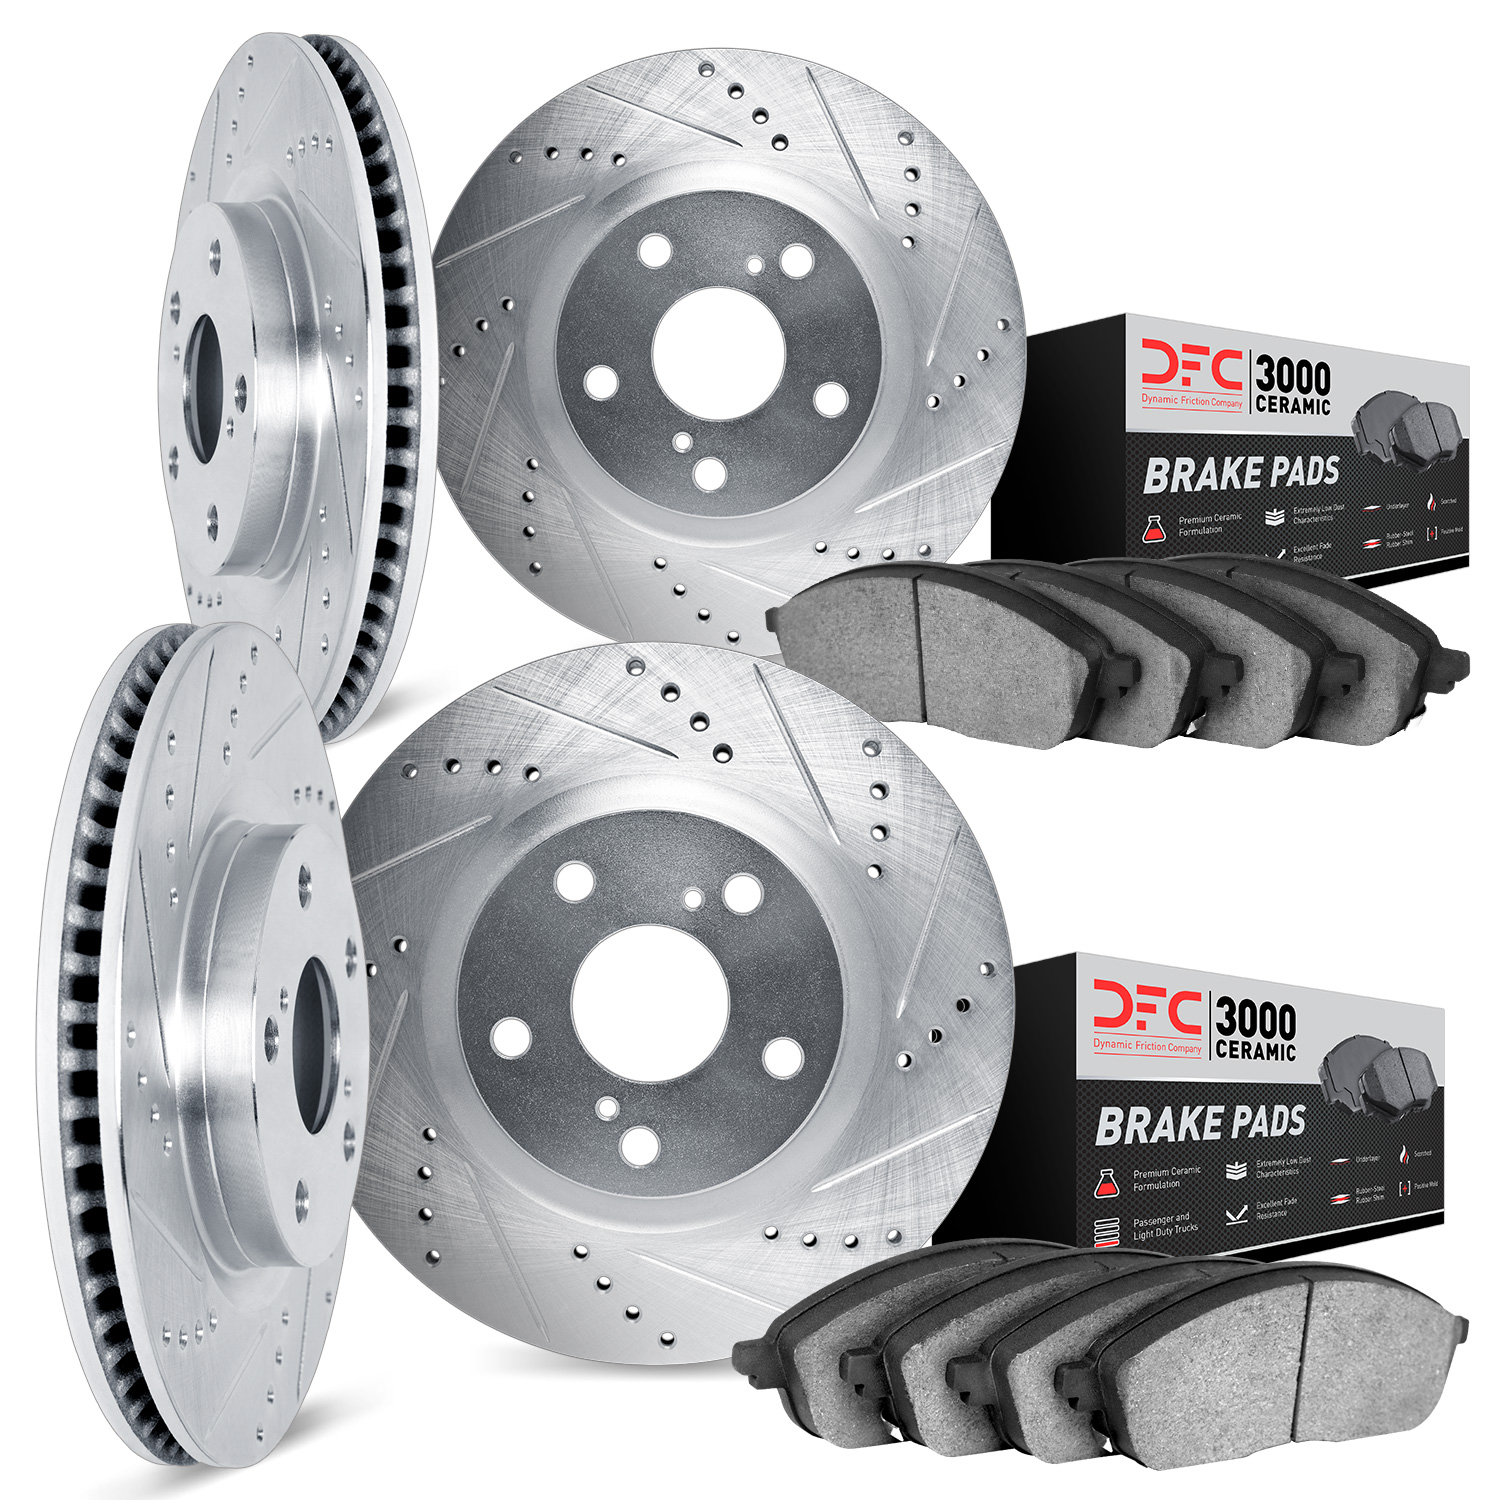 7304-68007 Drilled/Slotted Brake Rotor with 3000-Series Ceramic Brake Pads Kit [Silver], 2003-2008 Infiniti/Nissan, Position: Fr